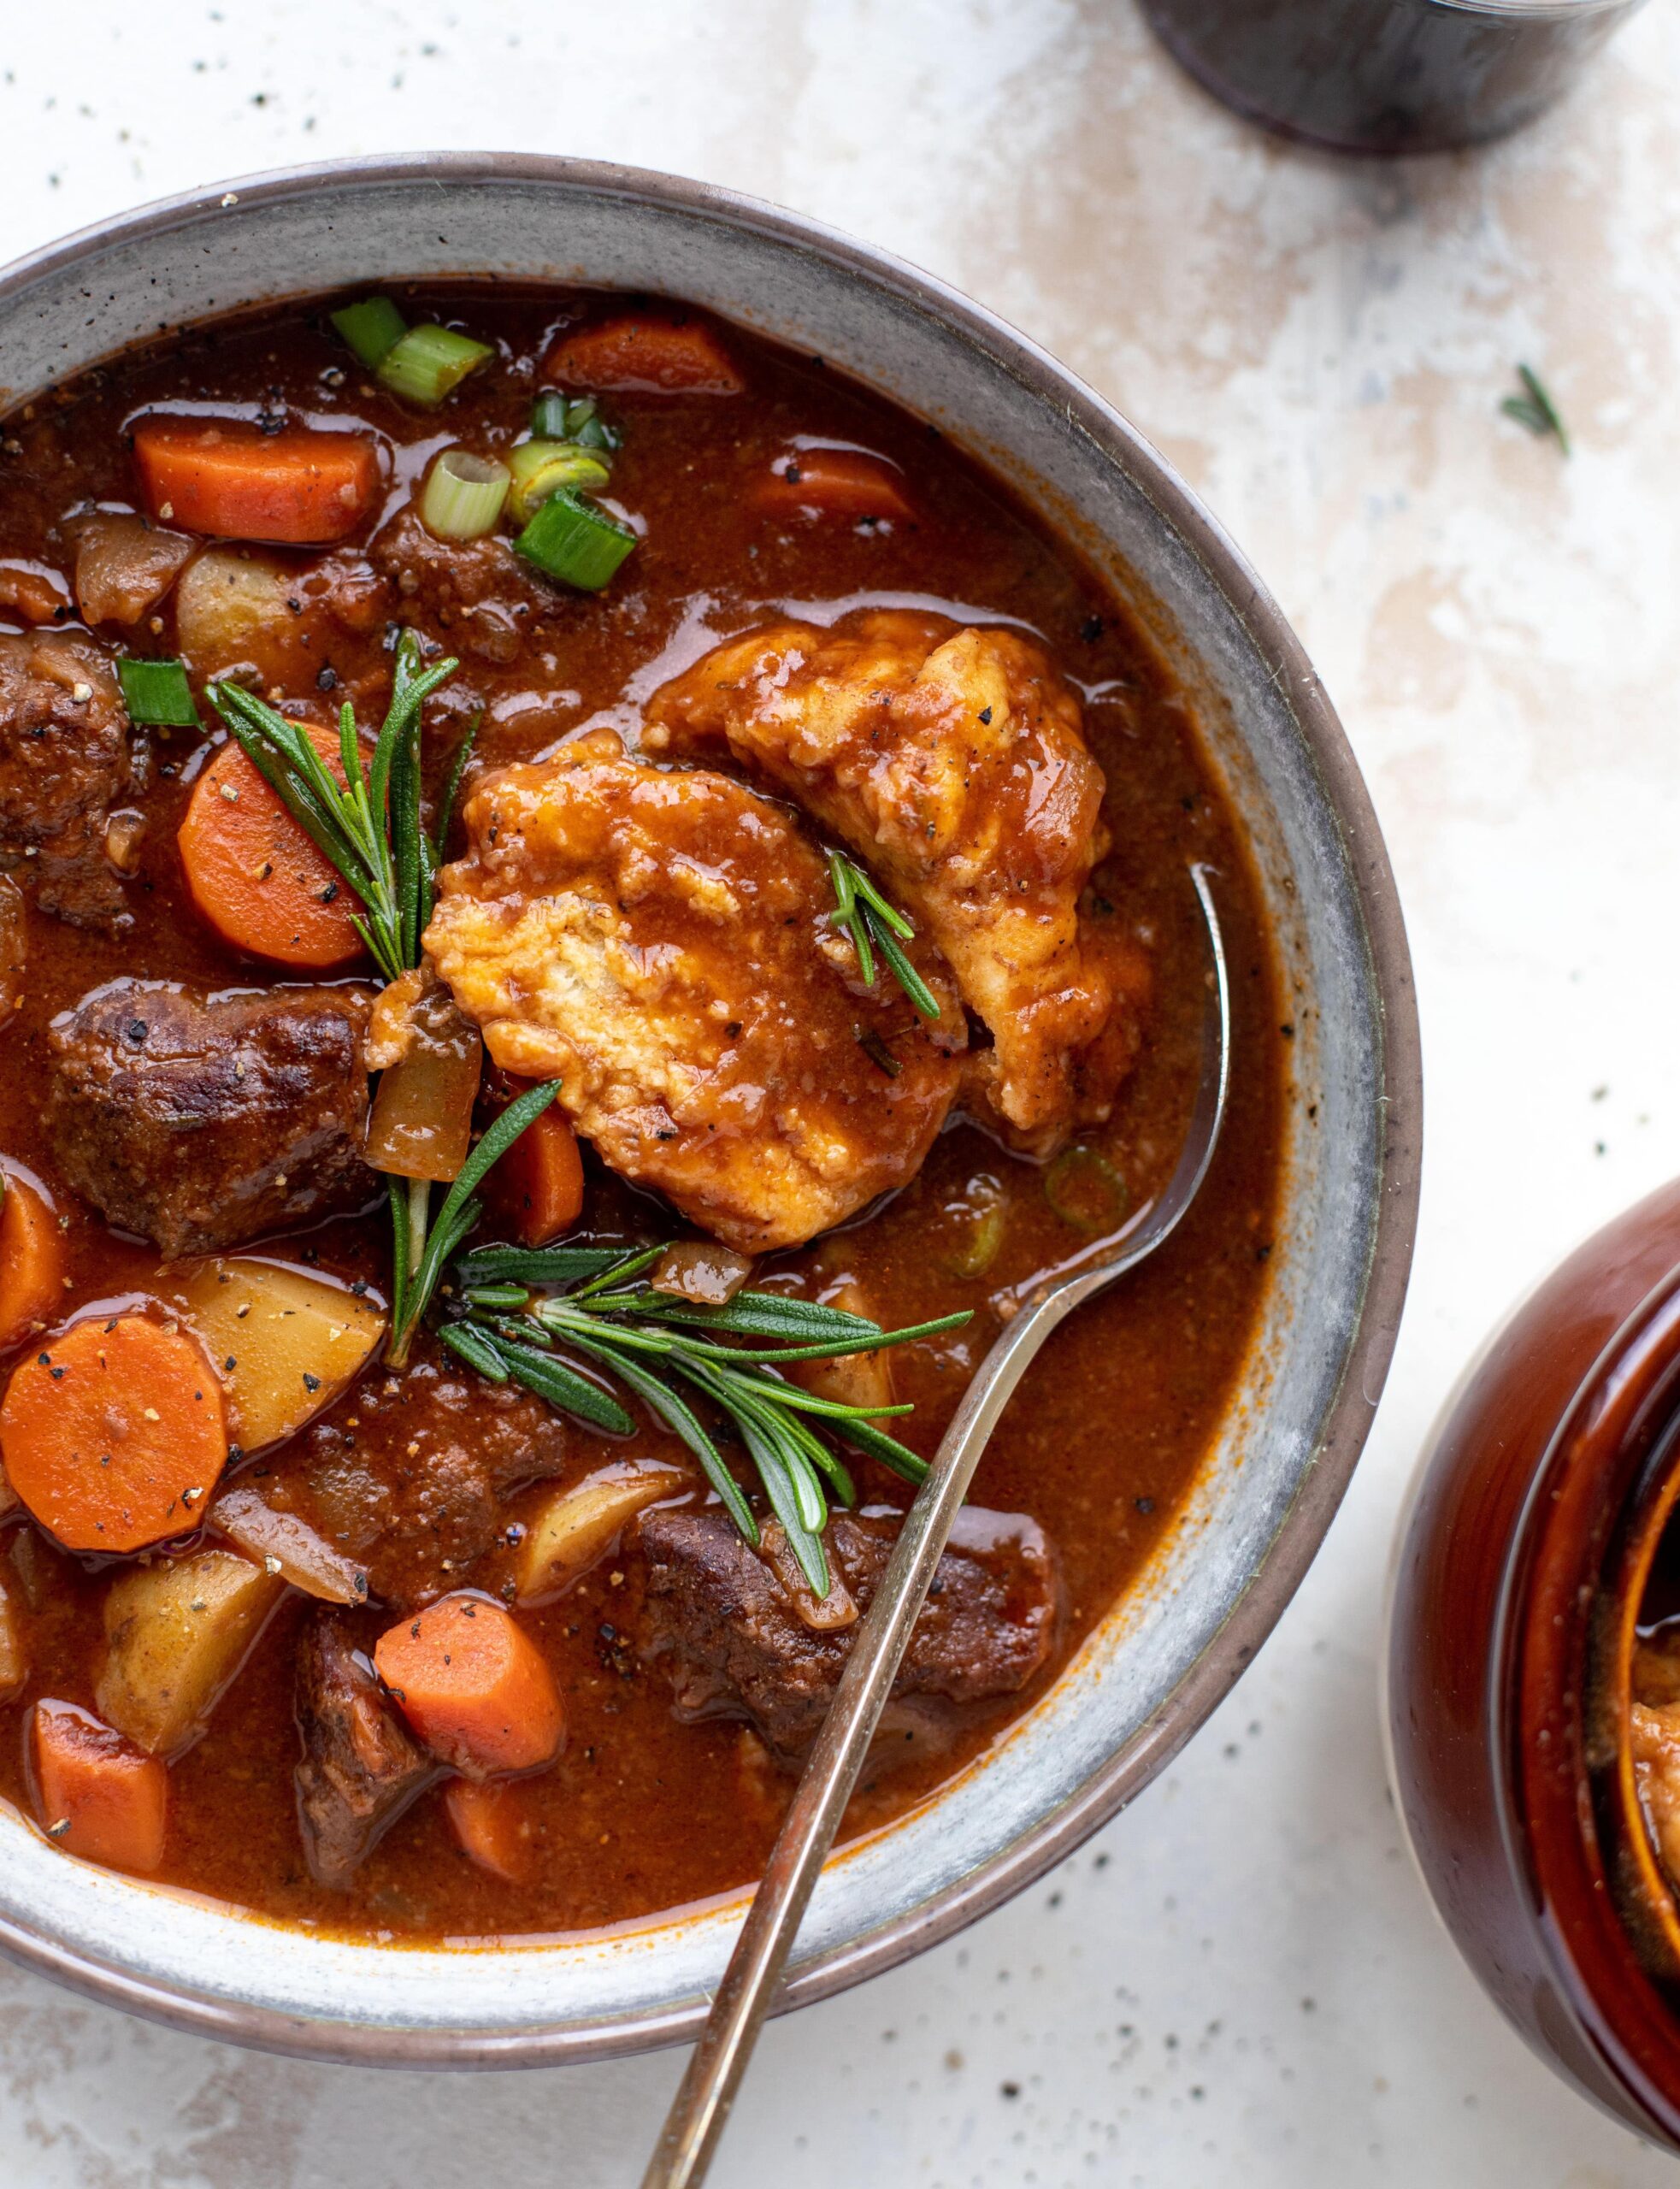  This hearty wine stew is sure to warm you up on a chilly night.